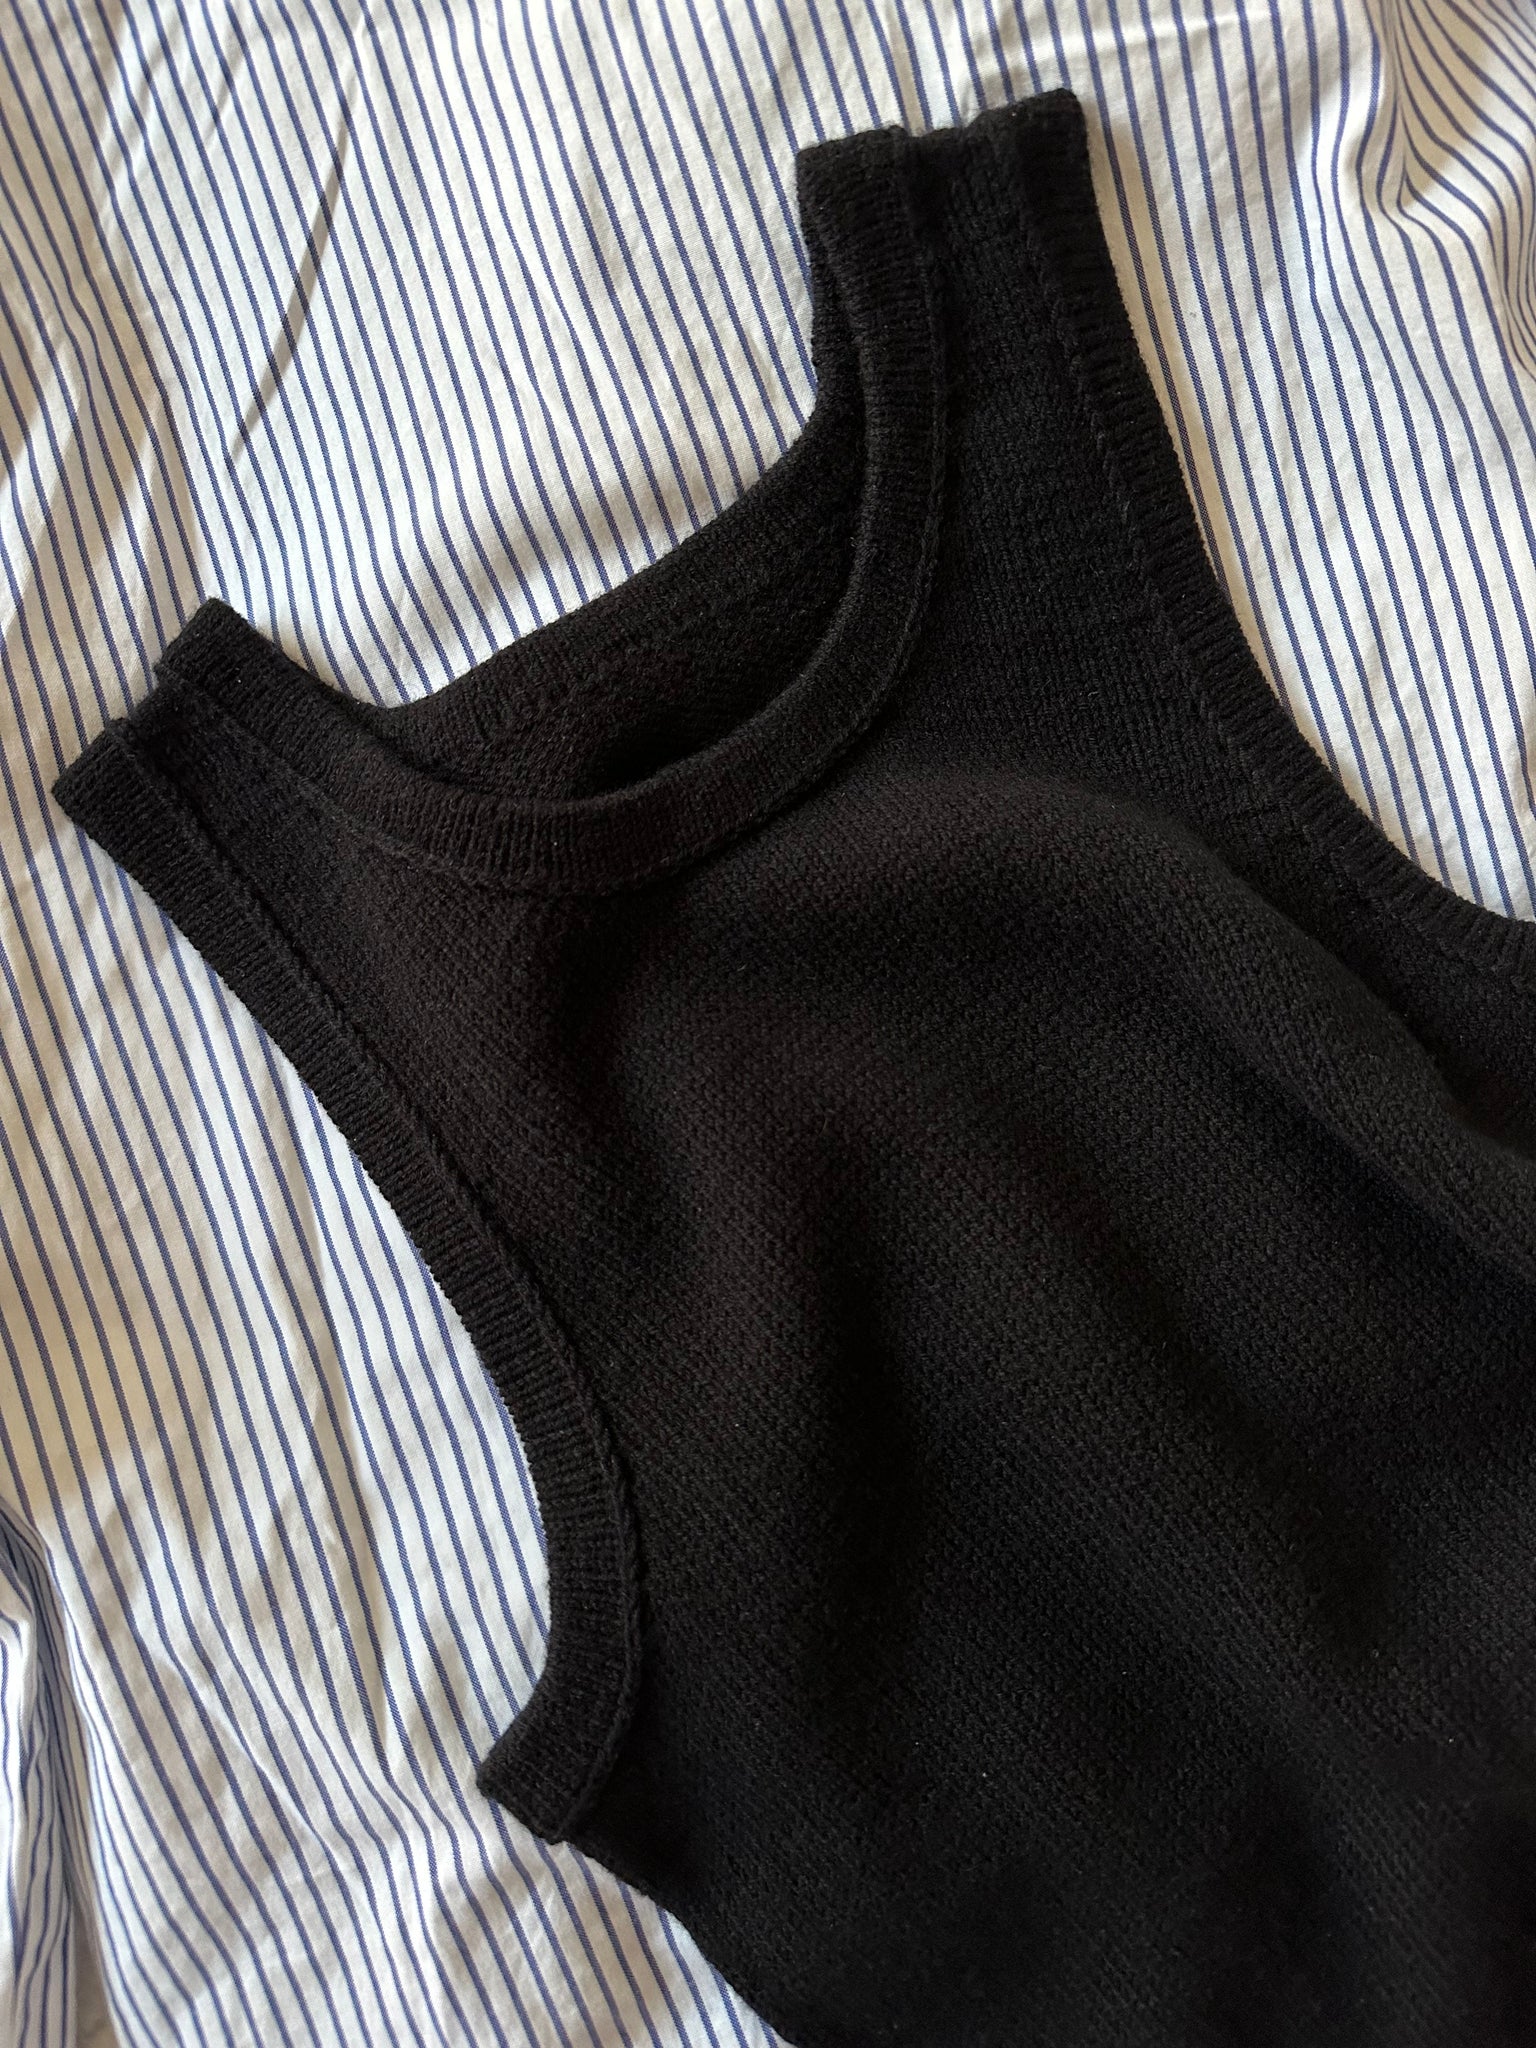 Camisole No. 9 - Knitting Pattern in English – • MY FAVOURITE